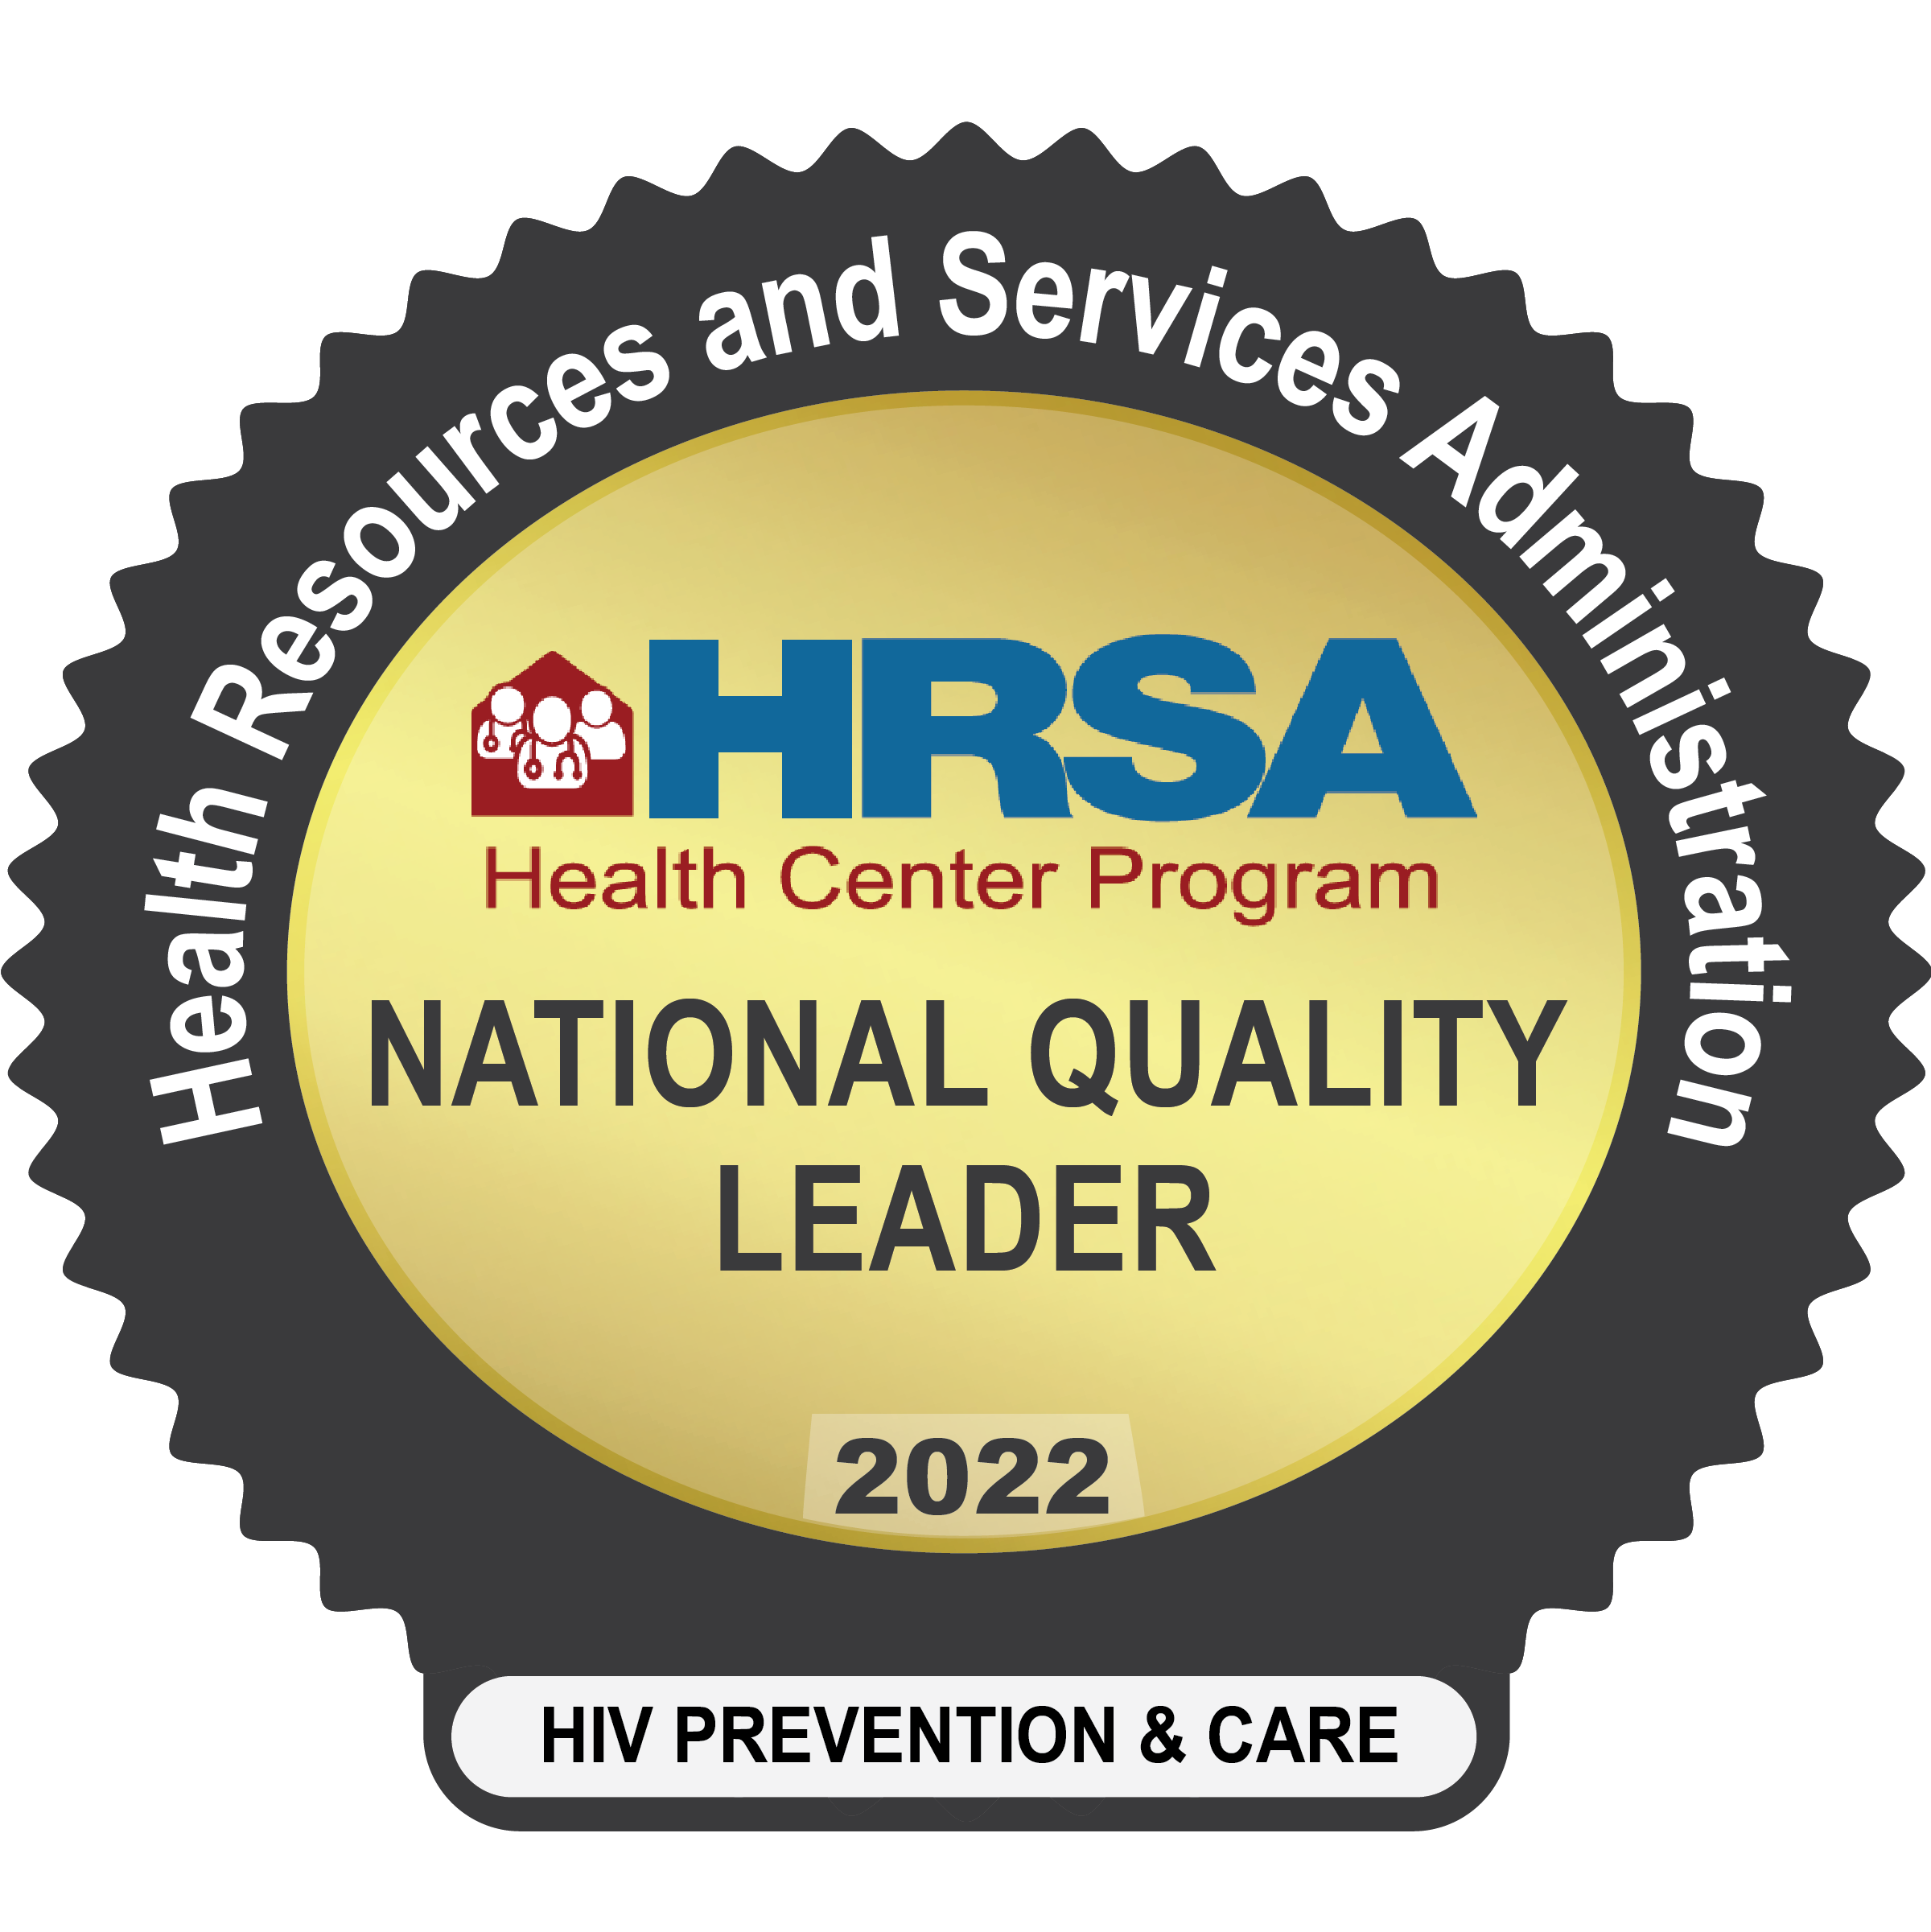 FoundCare Awarded National Quality Leader Badge In HIV Prevention & Care